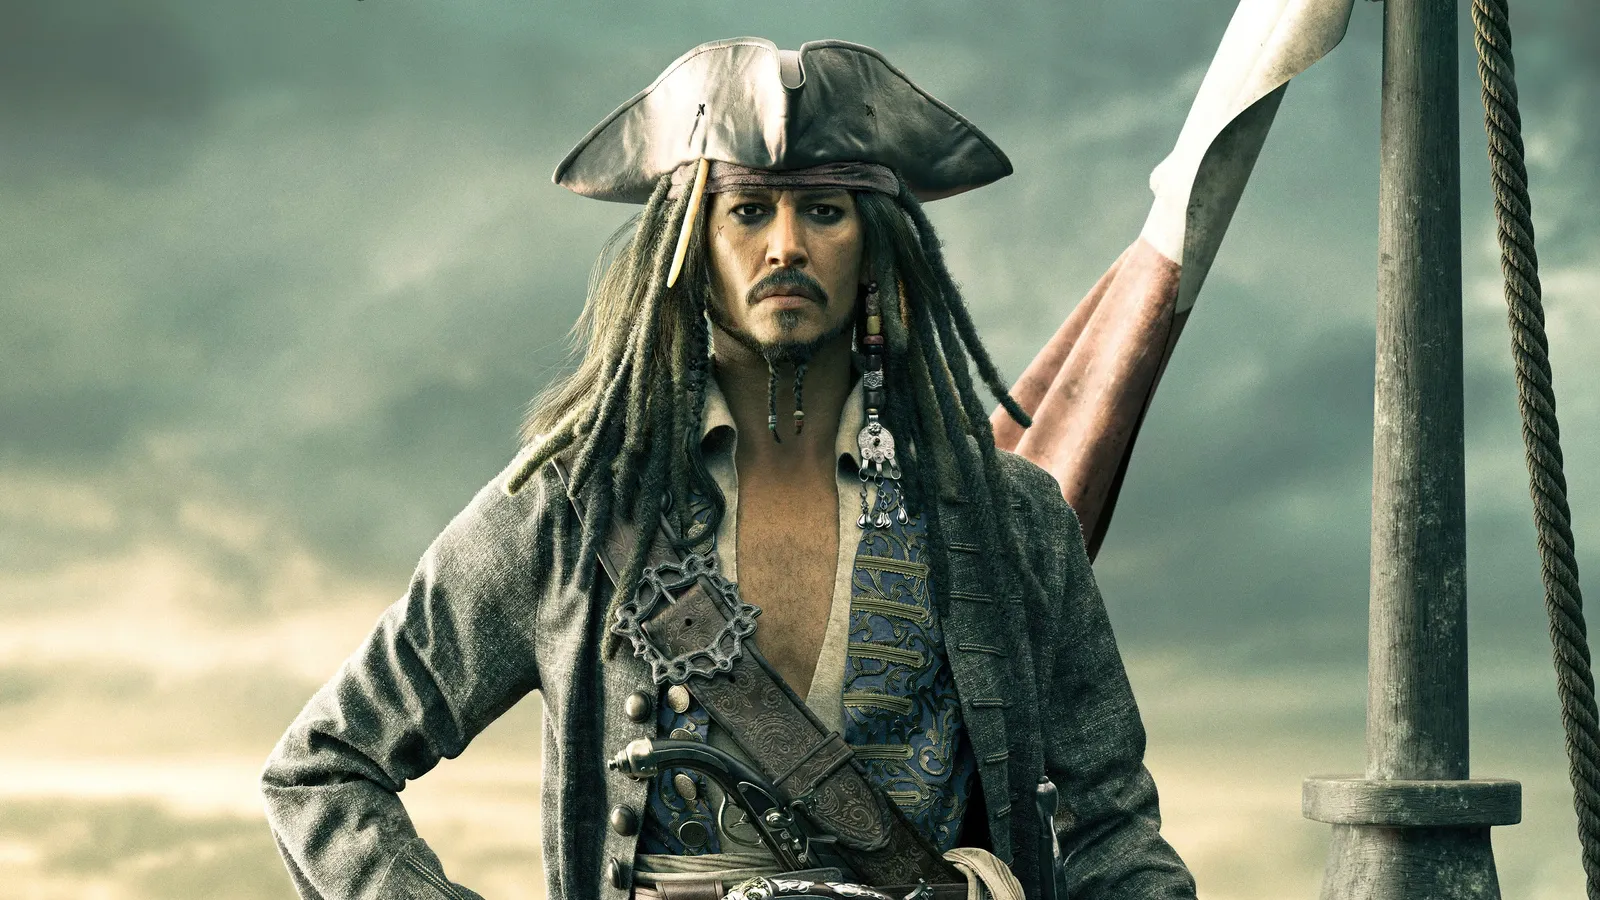 Jack Sparrow Johnny Depp.Pirates of the Caribbean 5 Pirates of the Caribbean 6 Reboot: Cast, Plot, and All You Need To Know